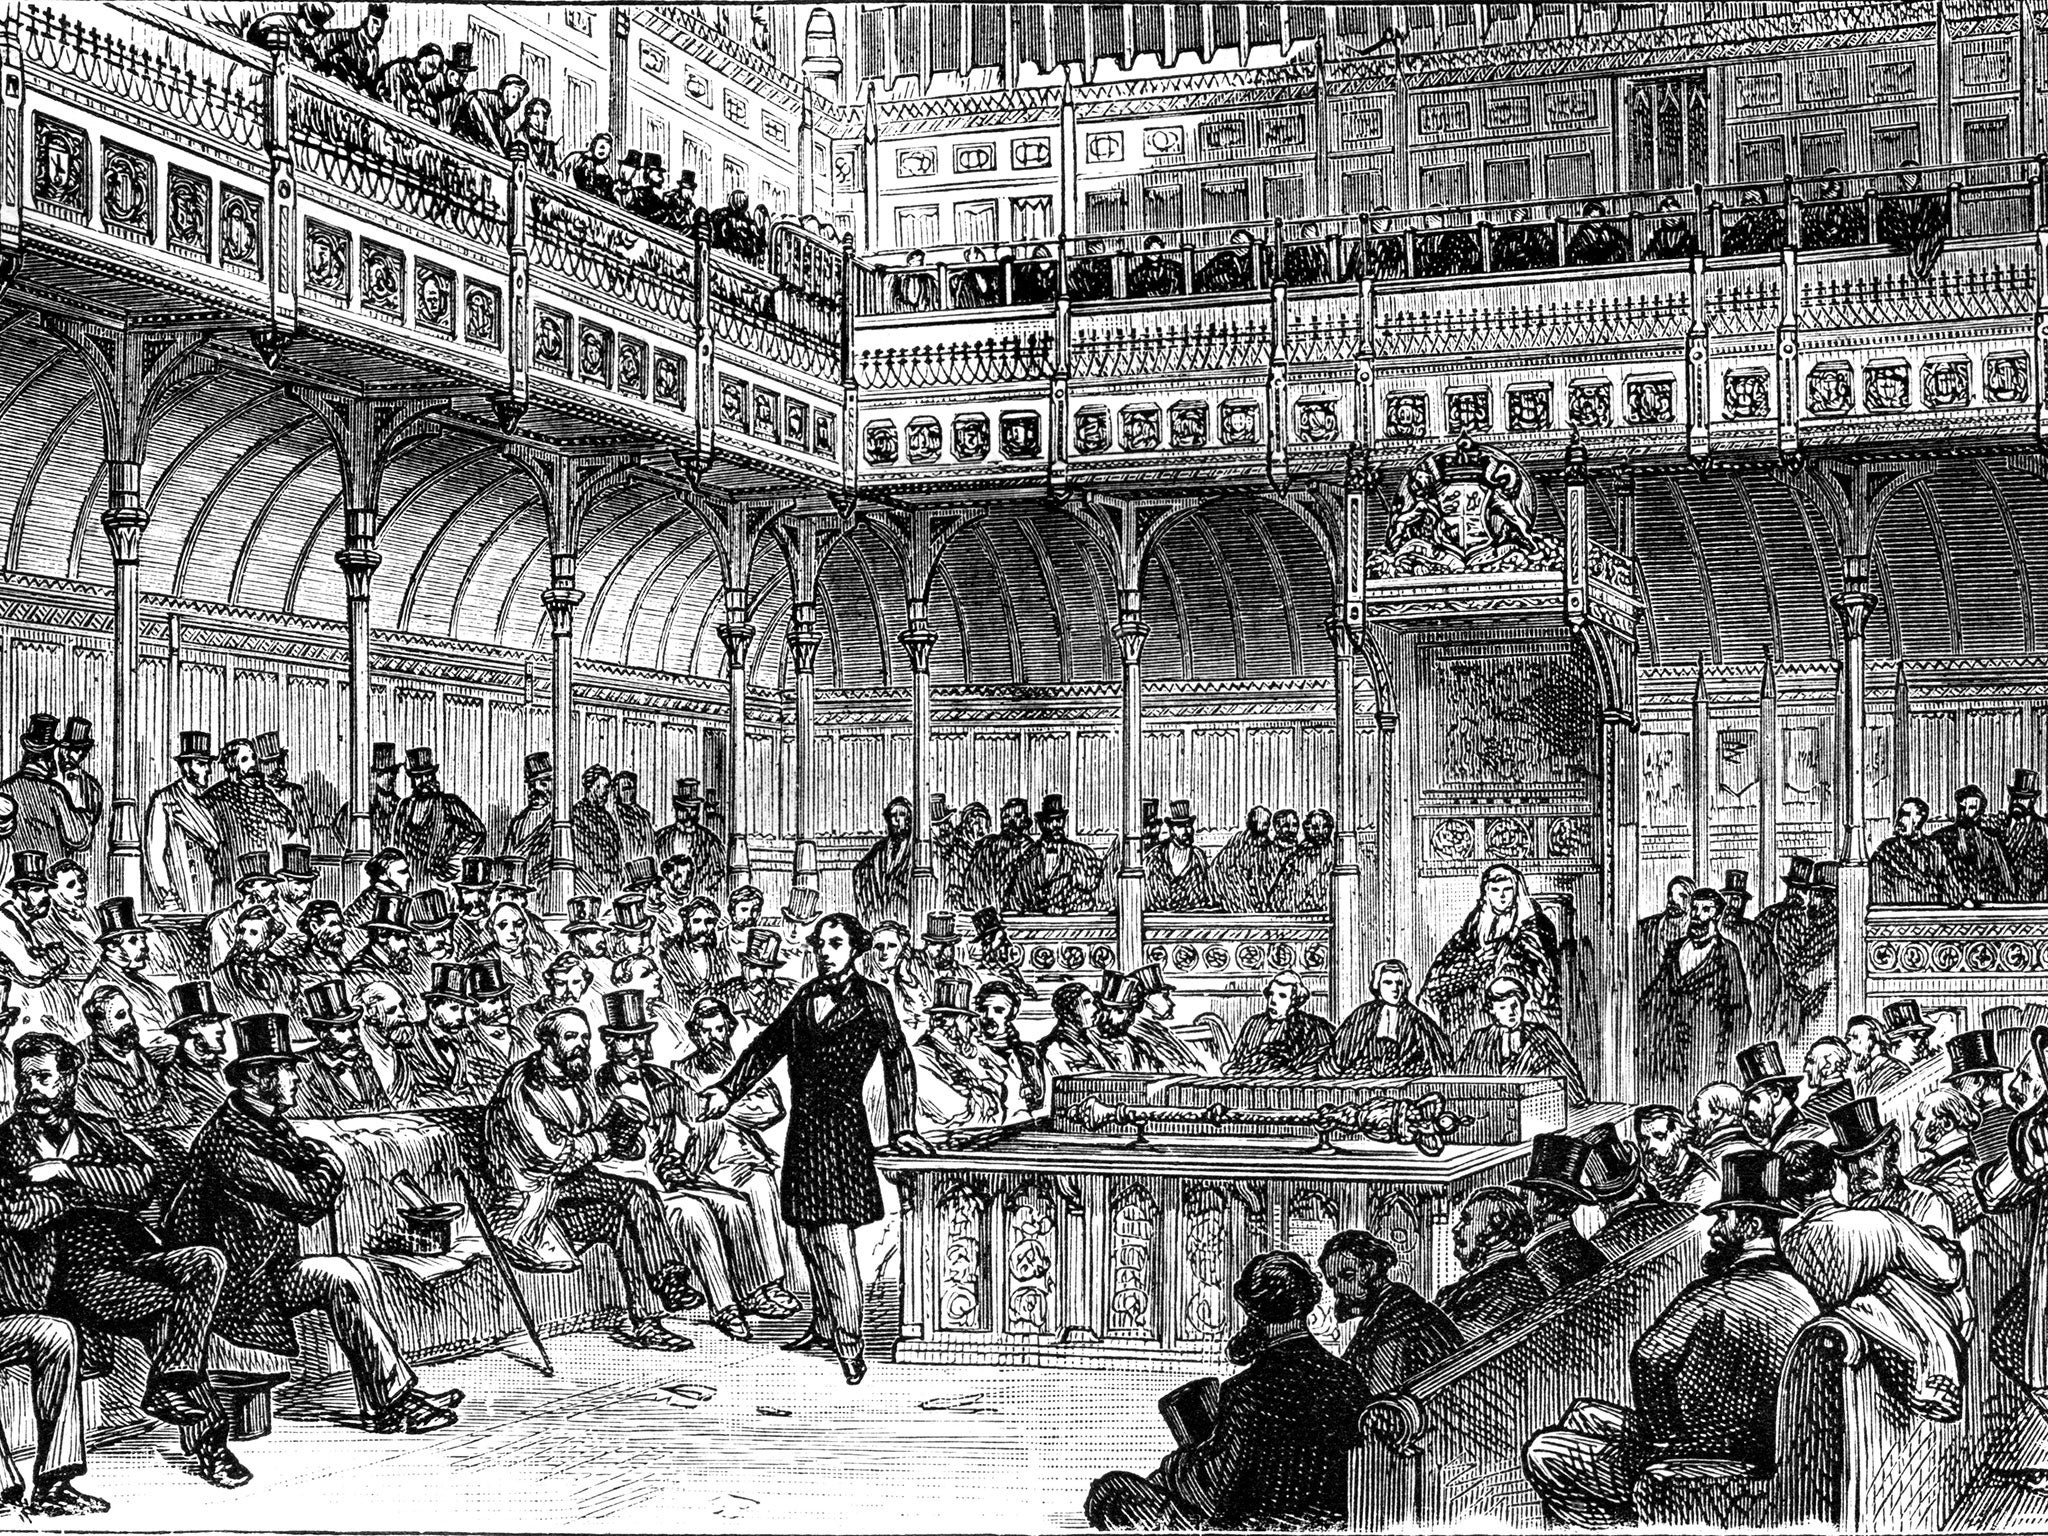 Parliament in session, with Disraeli standing